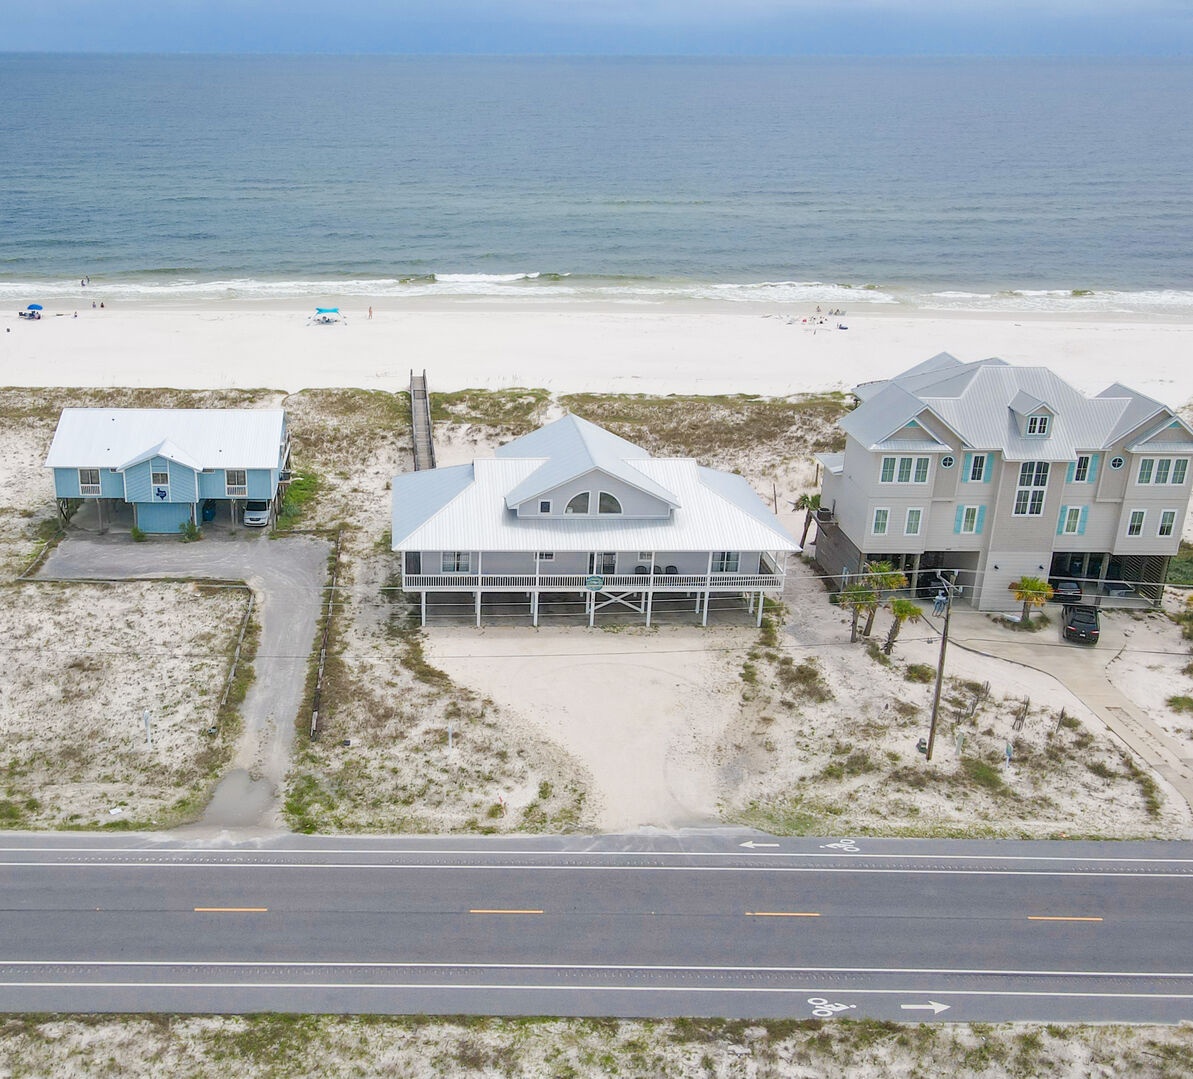 Sought after location with a private beach